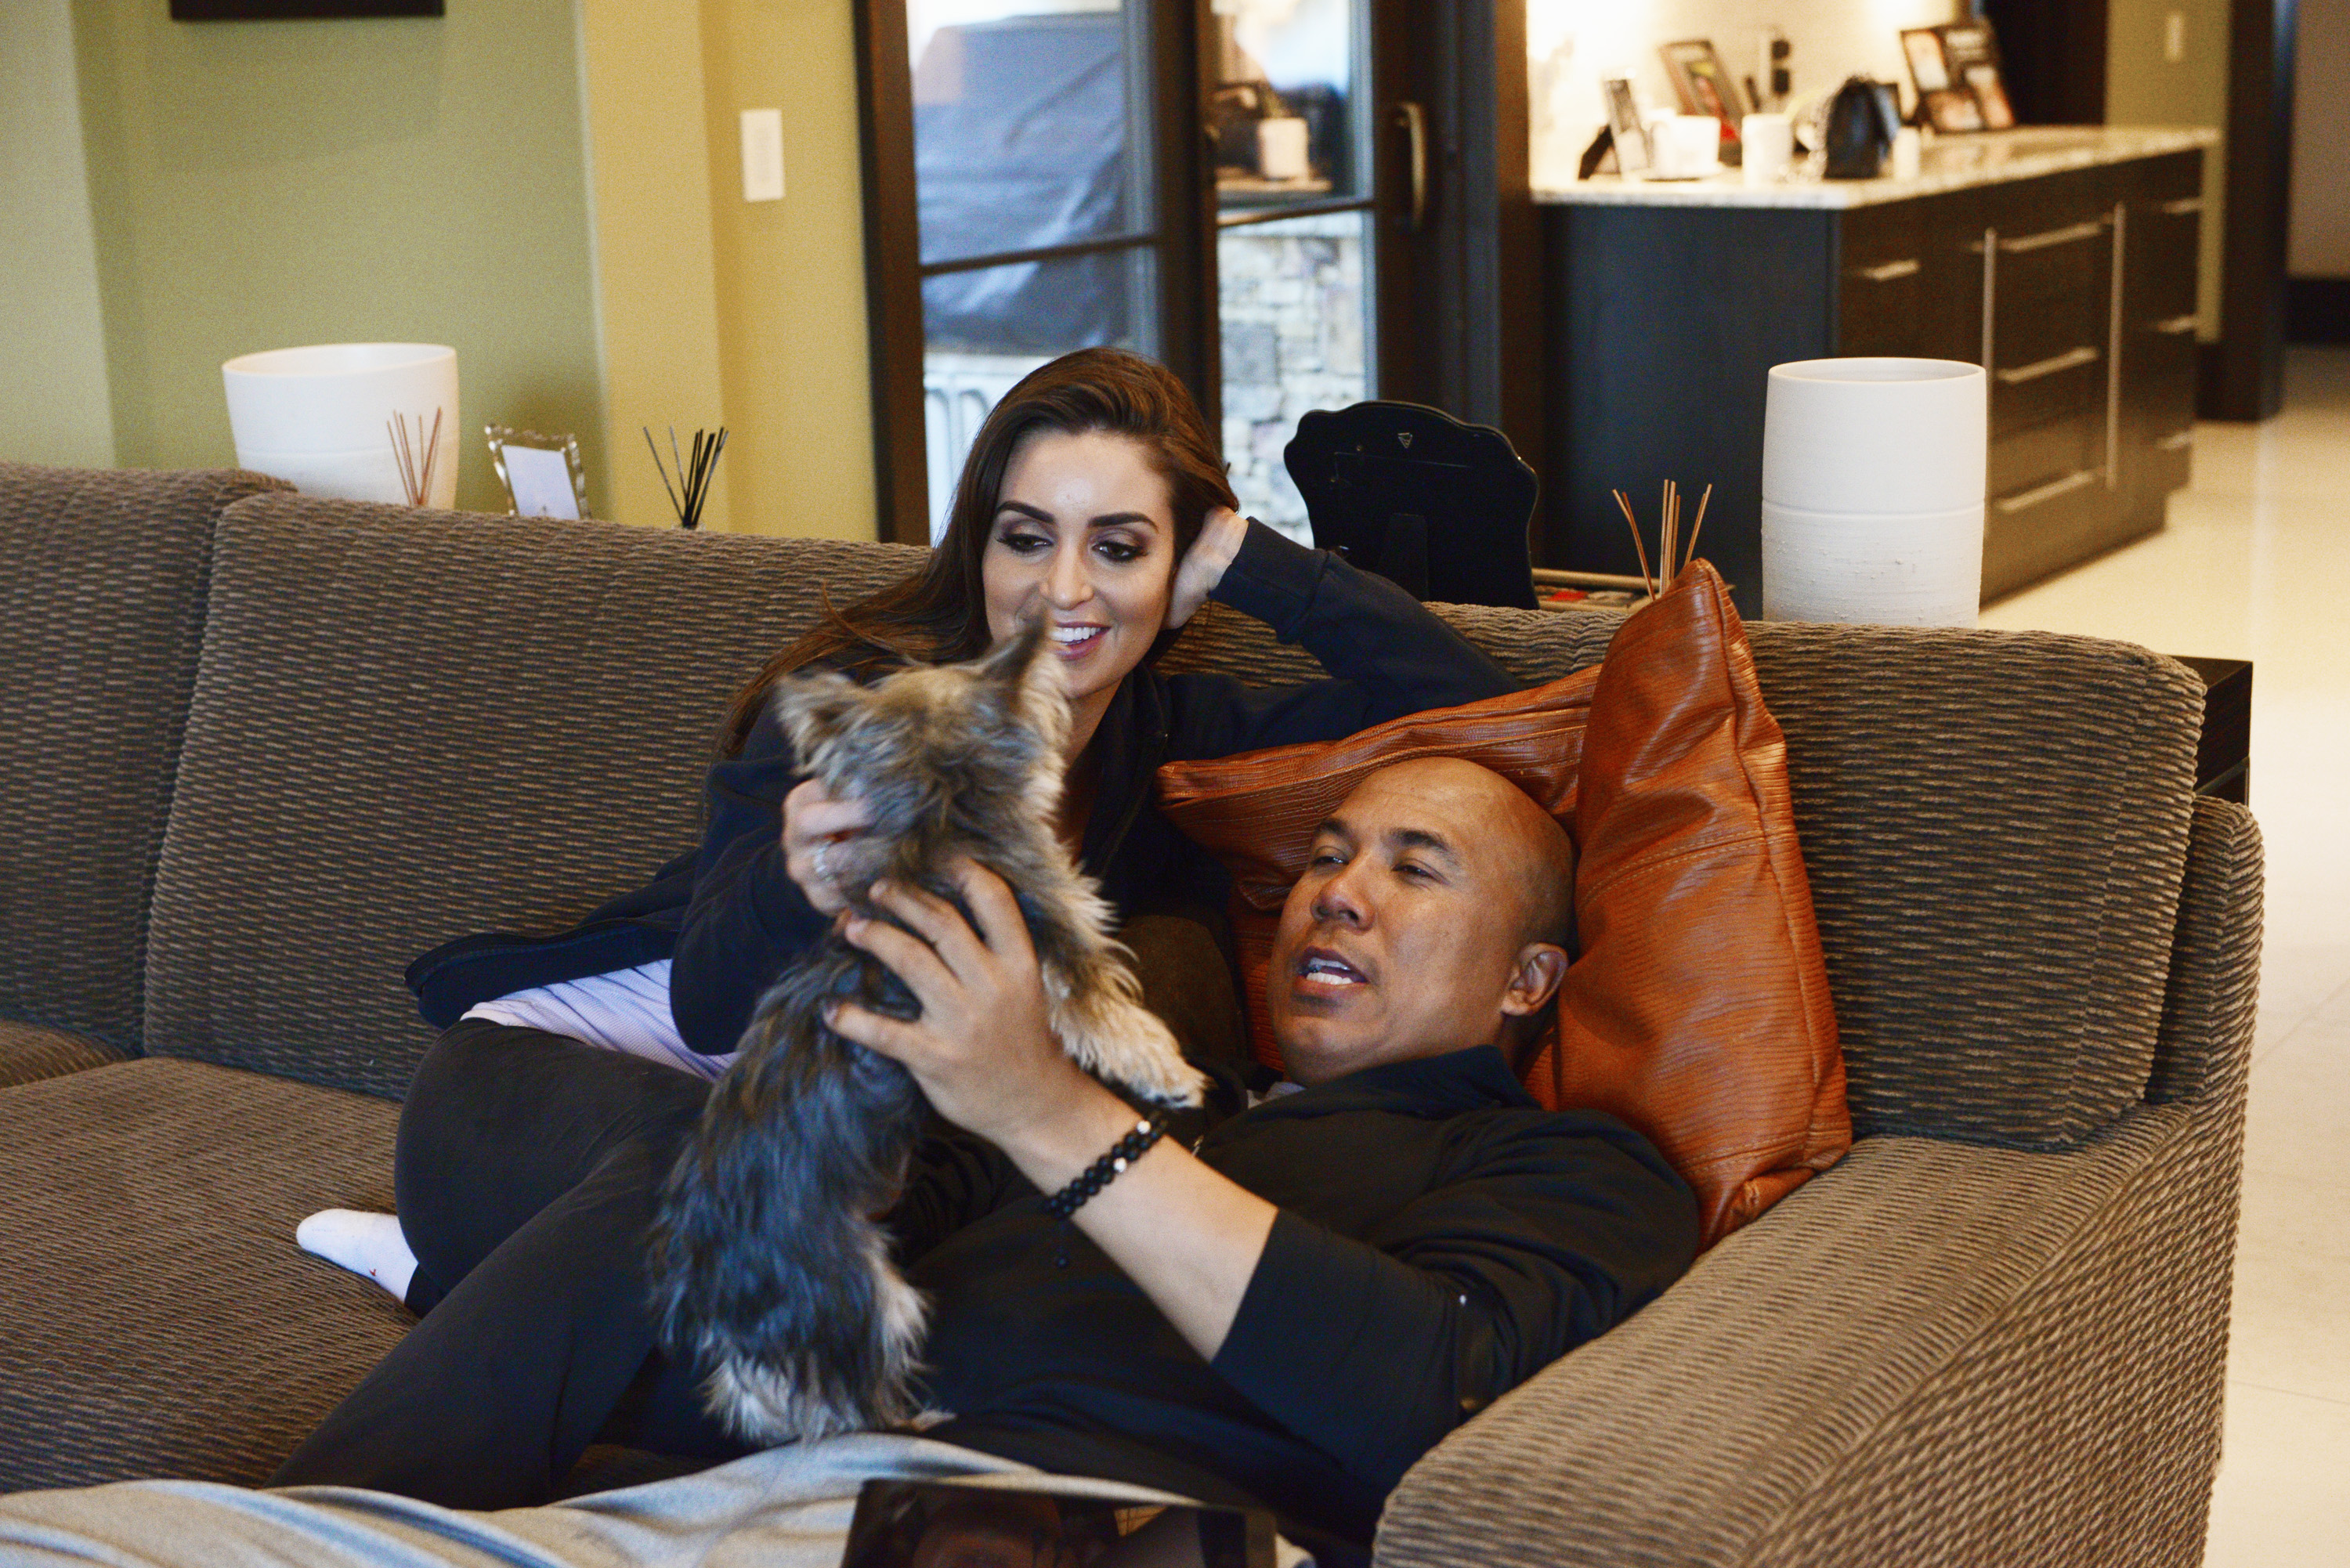 Hines Ward on ABCs Celebrity Wife Swap with Verne Troyer pic